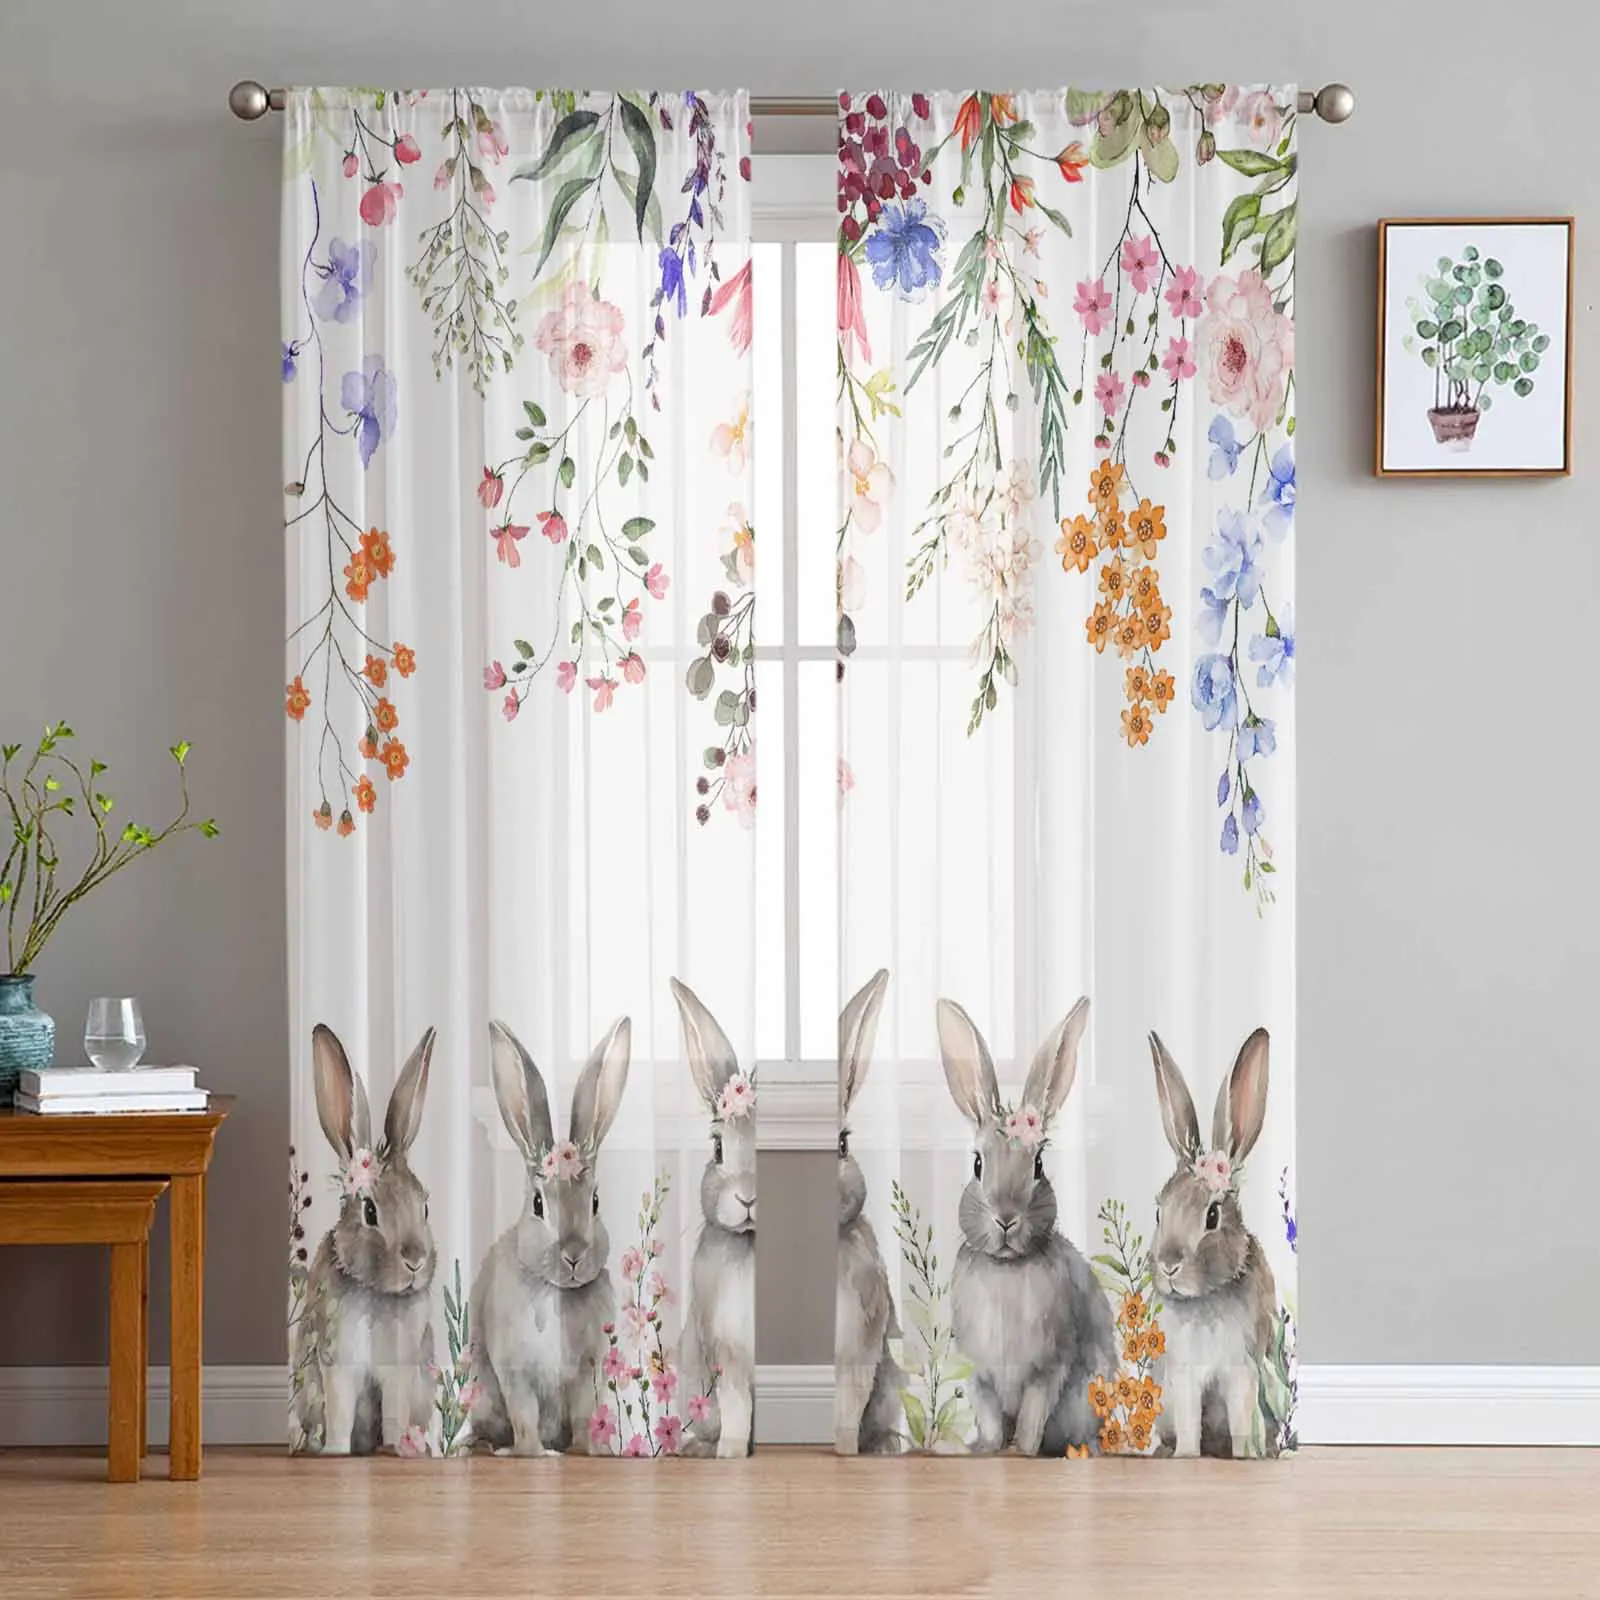 

Easter Herbaceous Plant Rabbit Watercolor Sheer Curtain Living Room Drapes Home Bedroom Voile Curtain Tulle Window Curtain